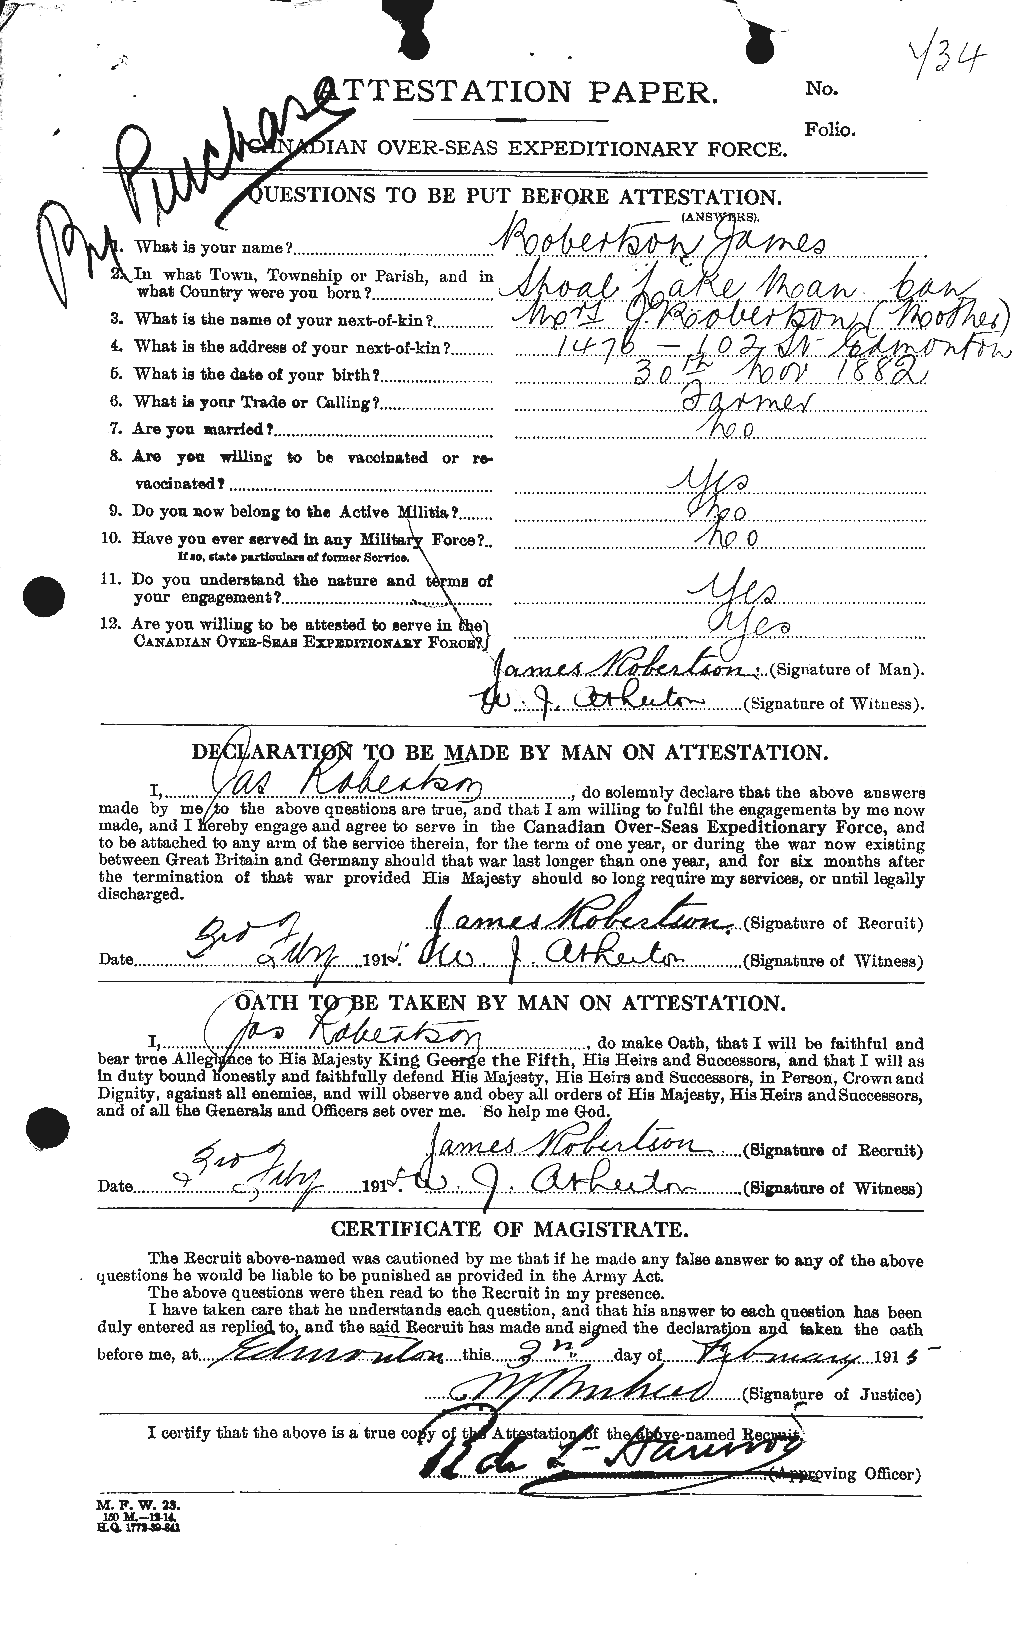 Personnel Records of the First World War - CEF 608615a